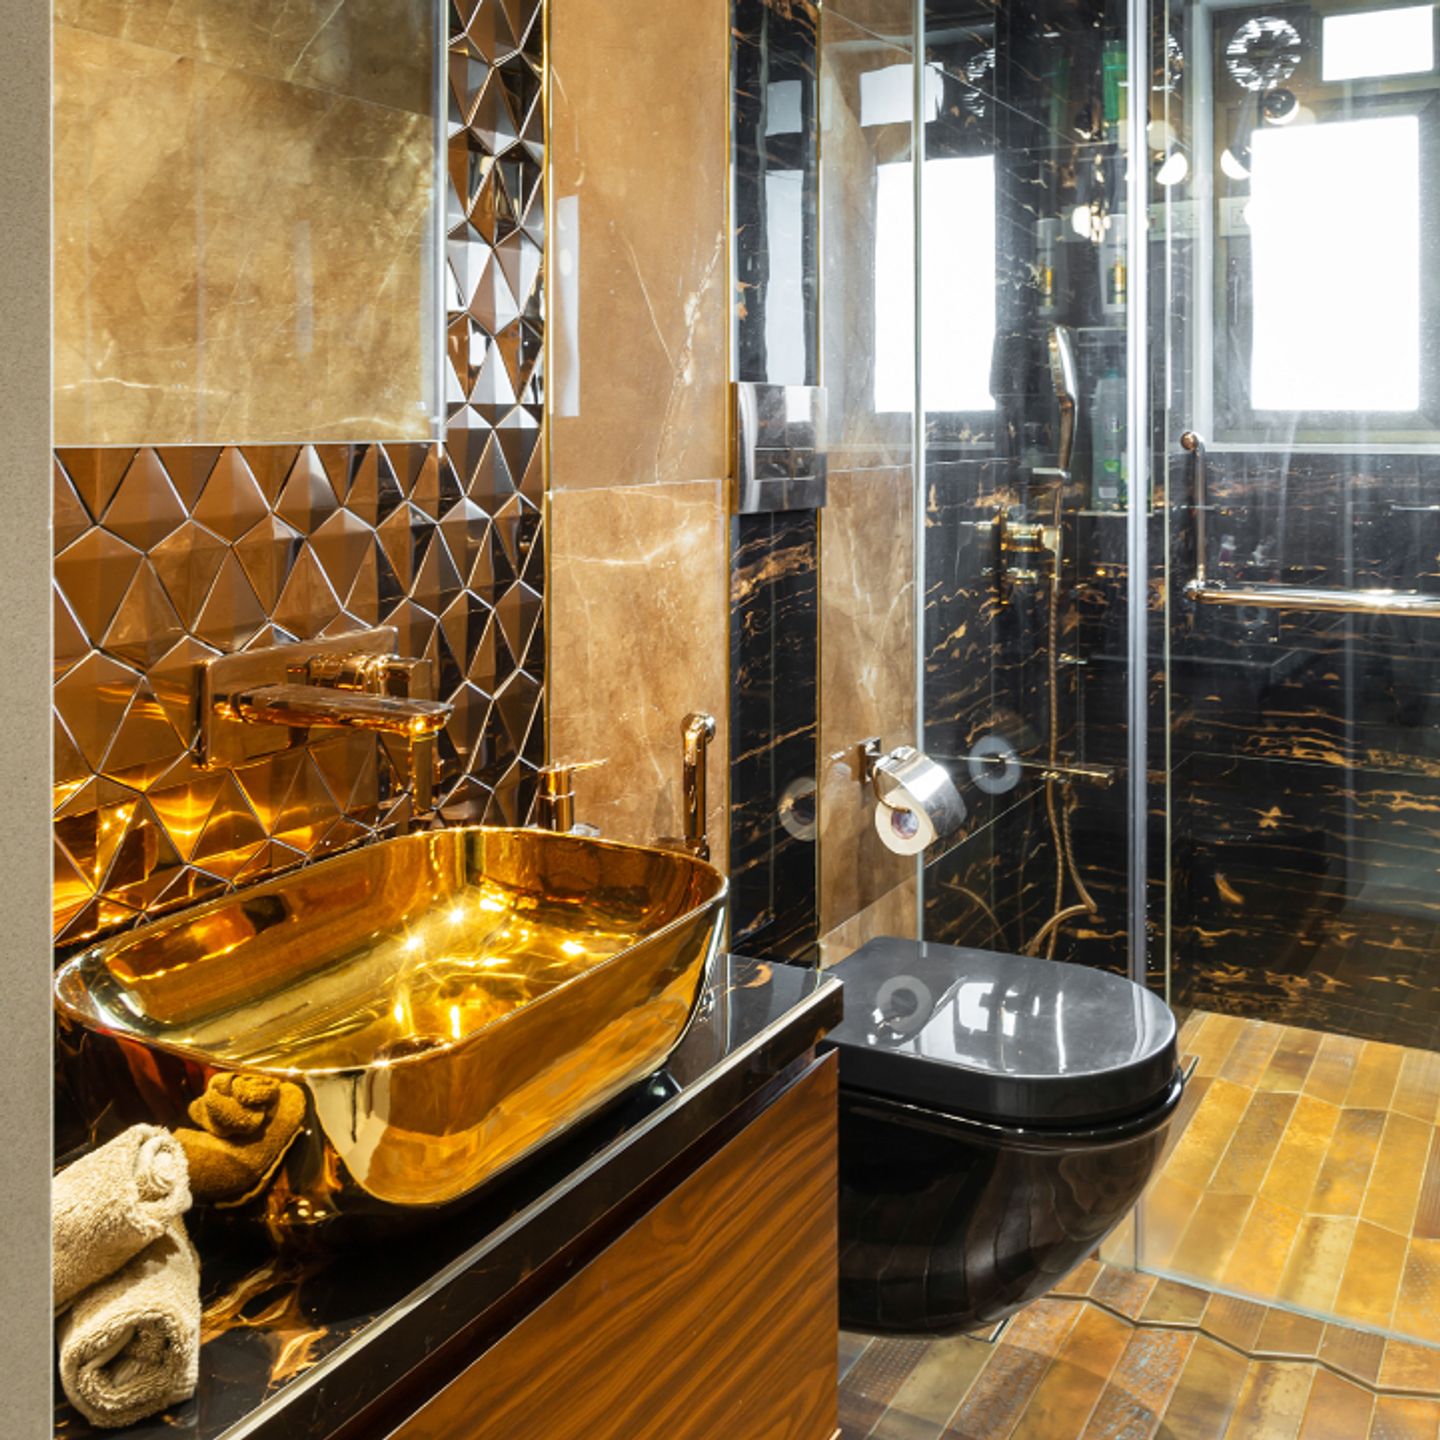 7X7 Ft Gold And Black Bathroom Design With Glass Partition - Livspace